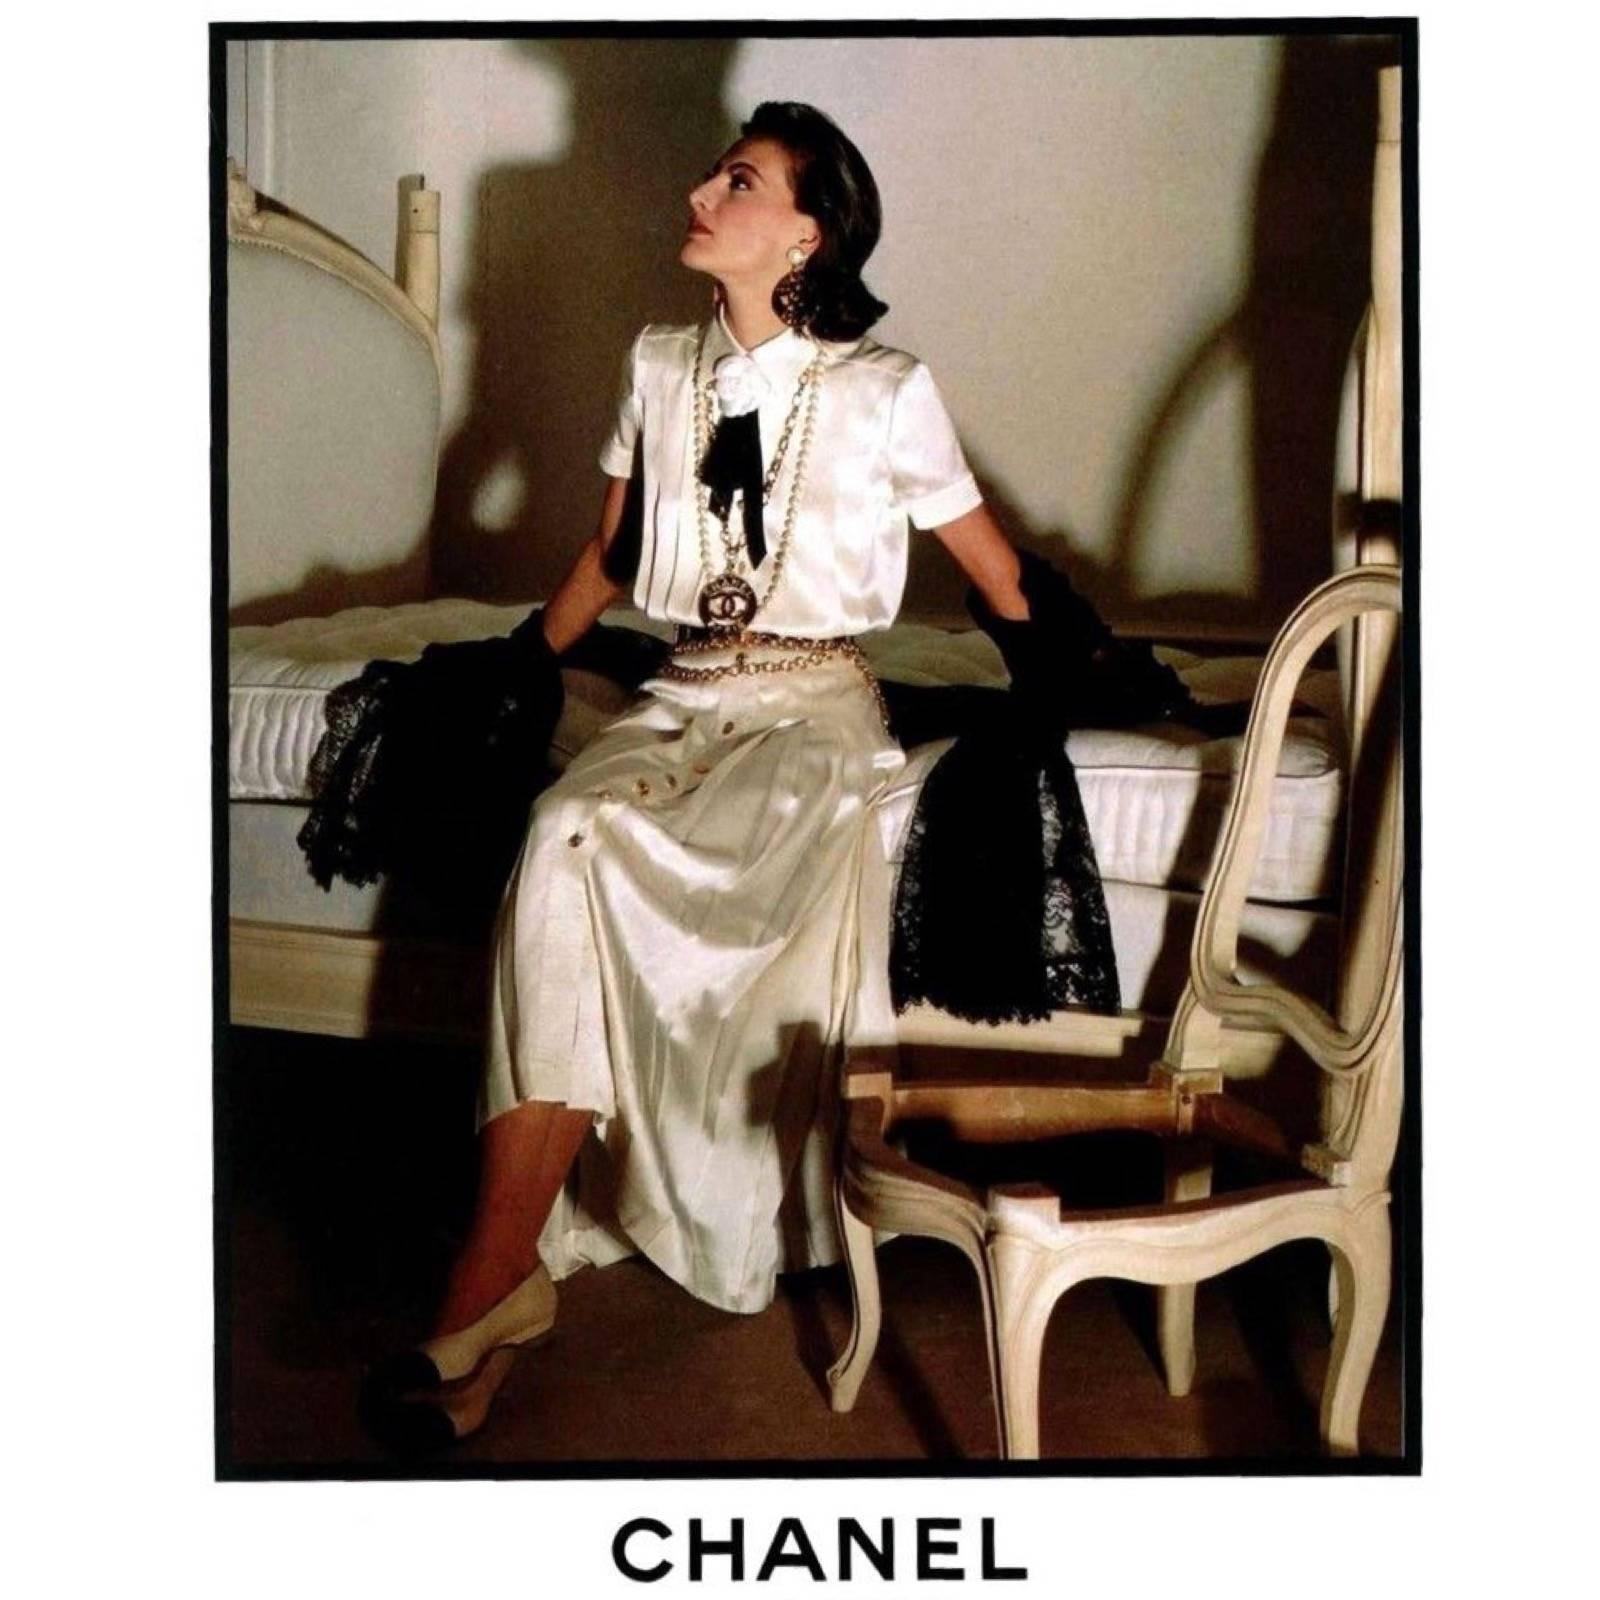 Karl Lagerfeld has always evoked the stylish essence of Coco Chanel. Creative Director for Chanel since 1983, Lagerfeld’s work during the 1990s seemed to possess the kind of glam that grows out of historic allusion and expert material manipulation.